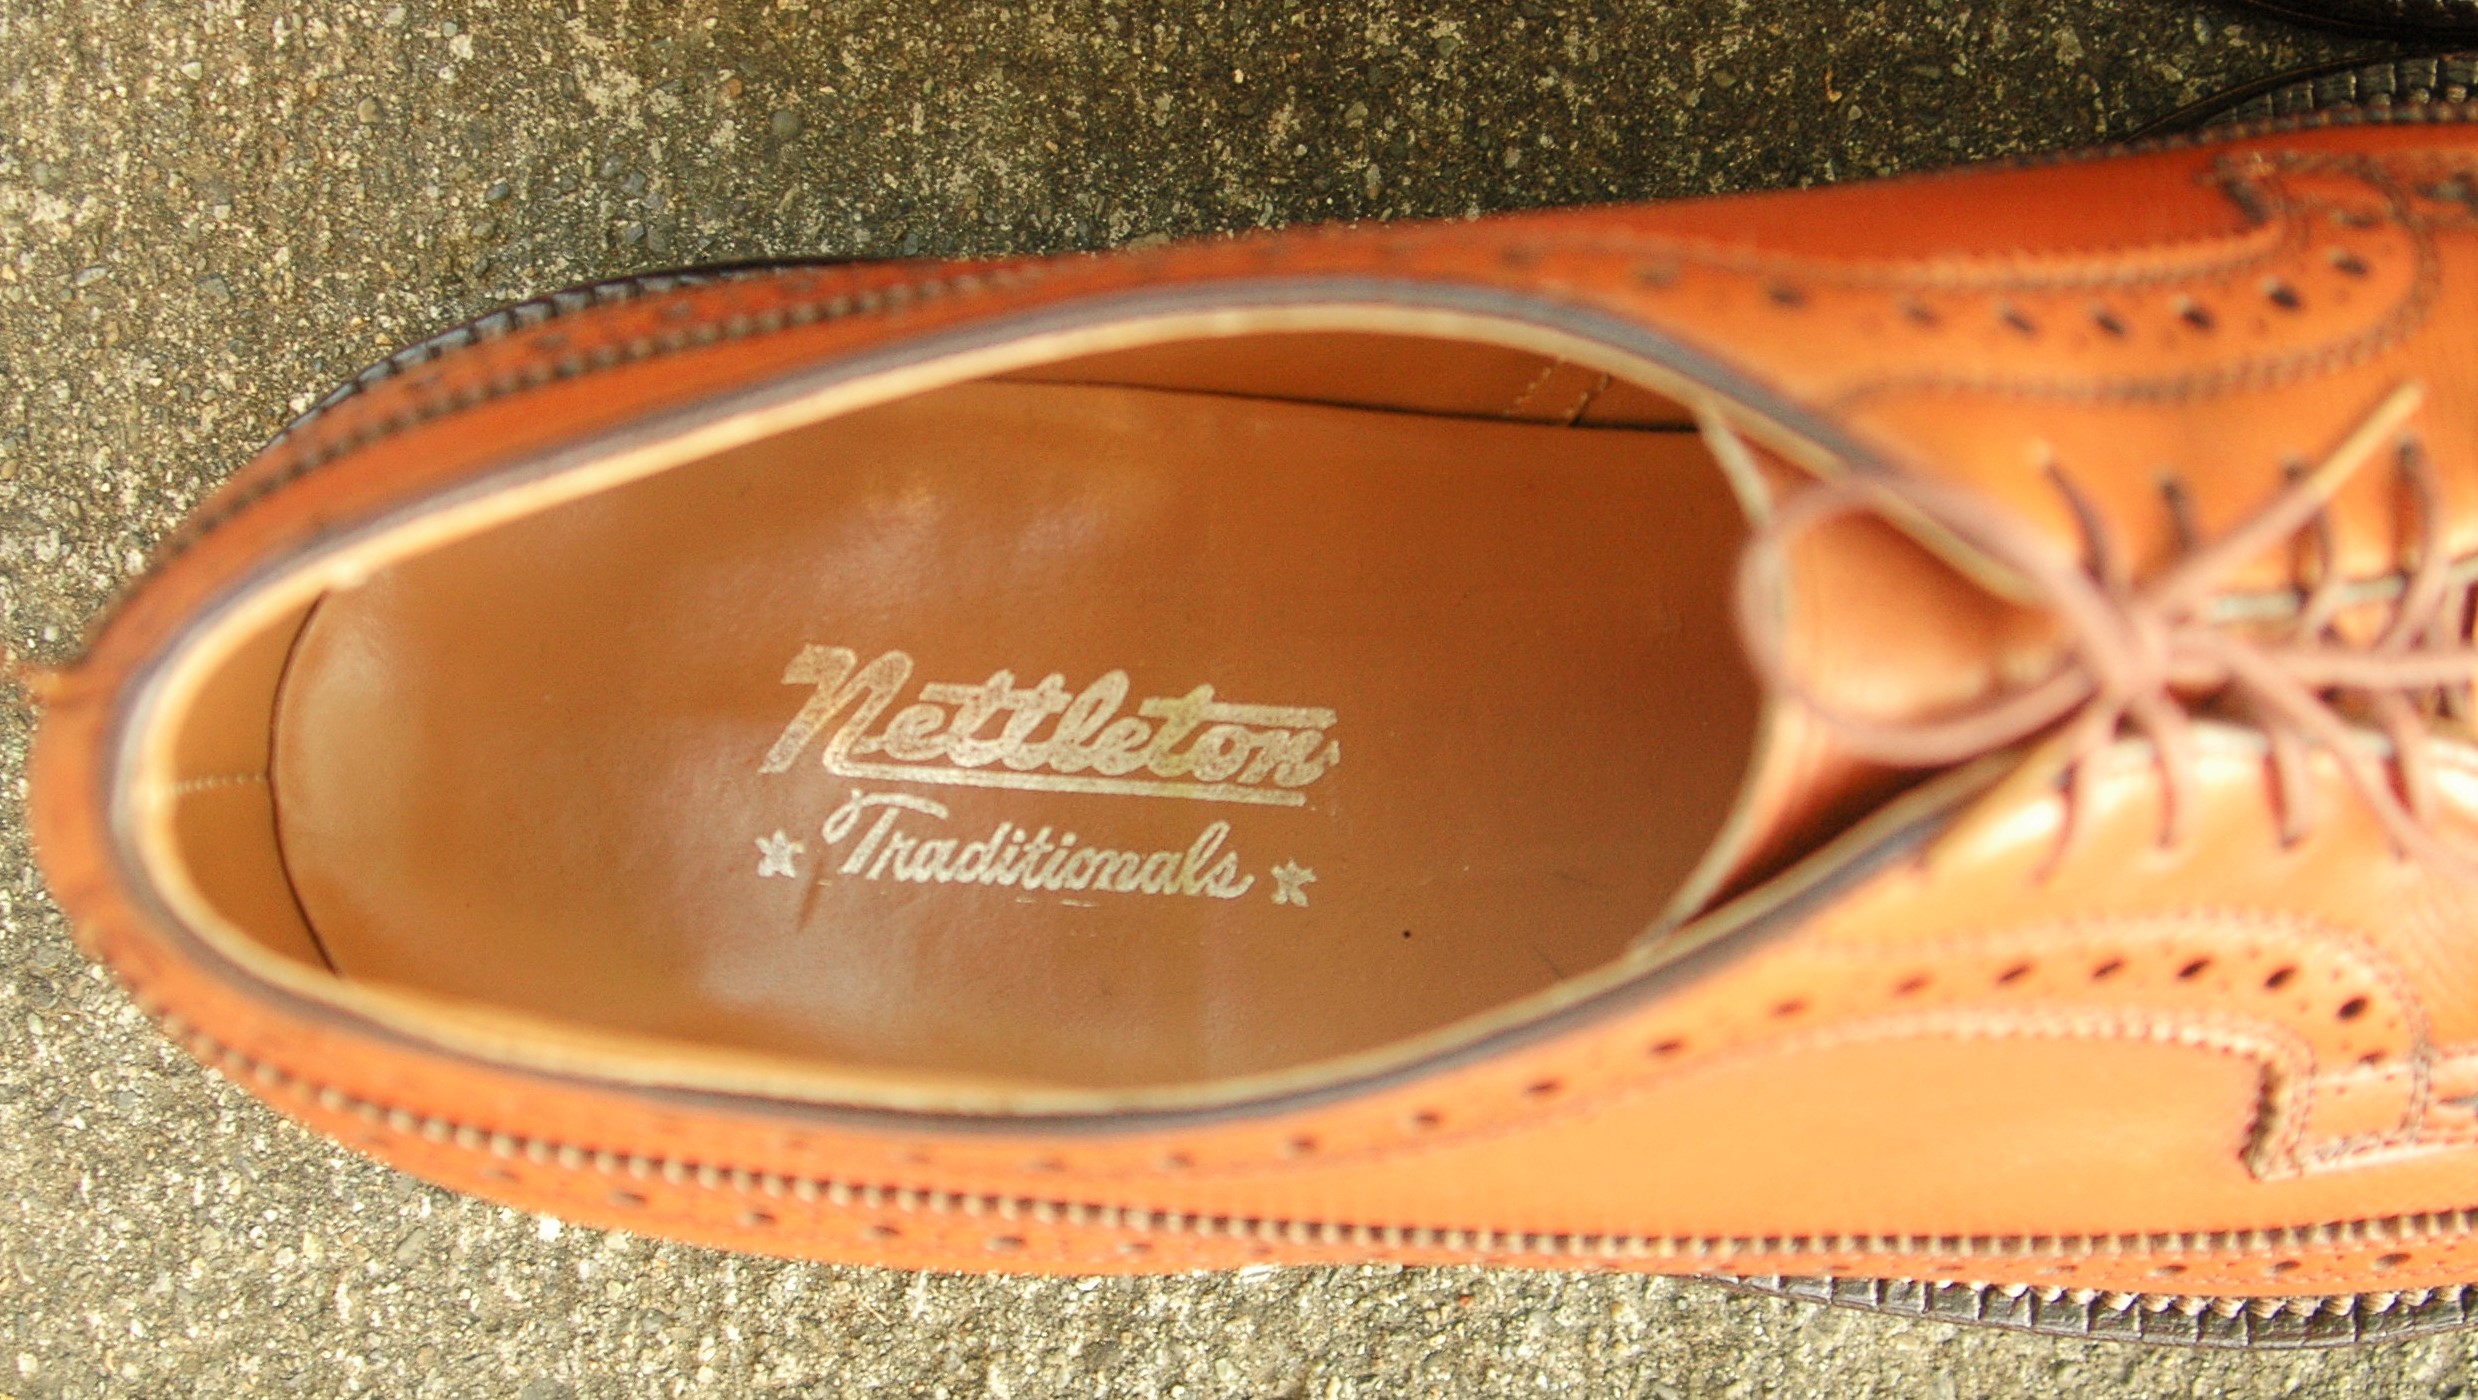 Nettleton Traditionals 0205 and 0206 | vcleat